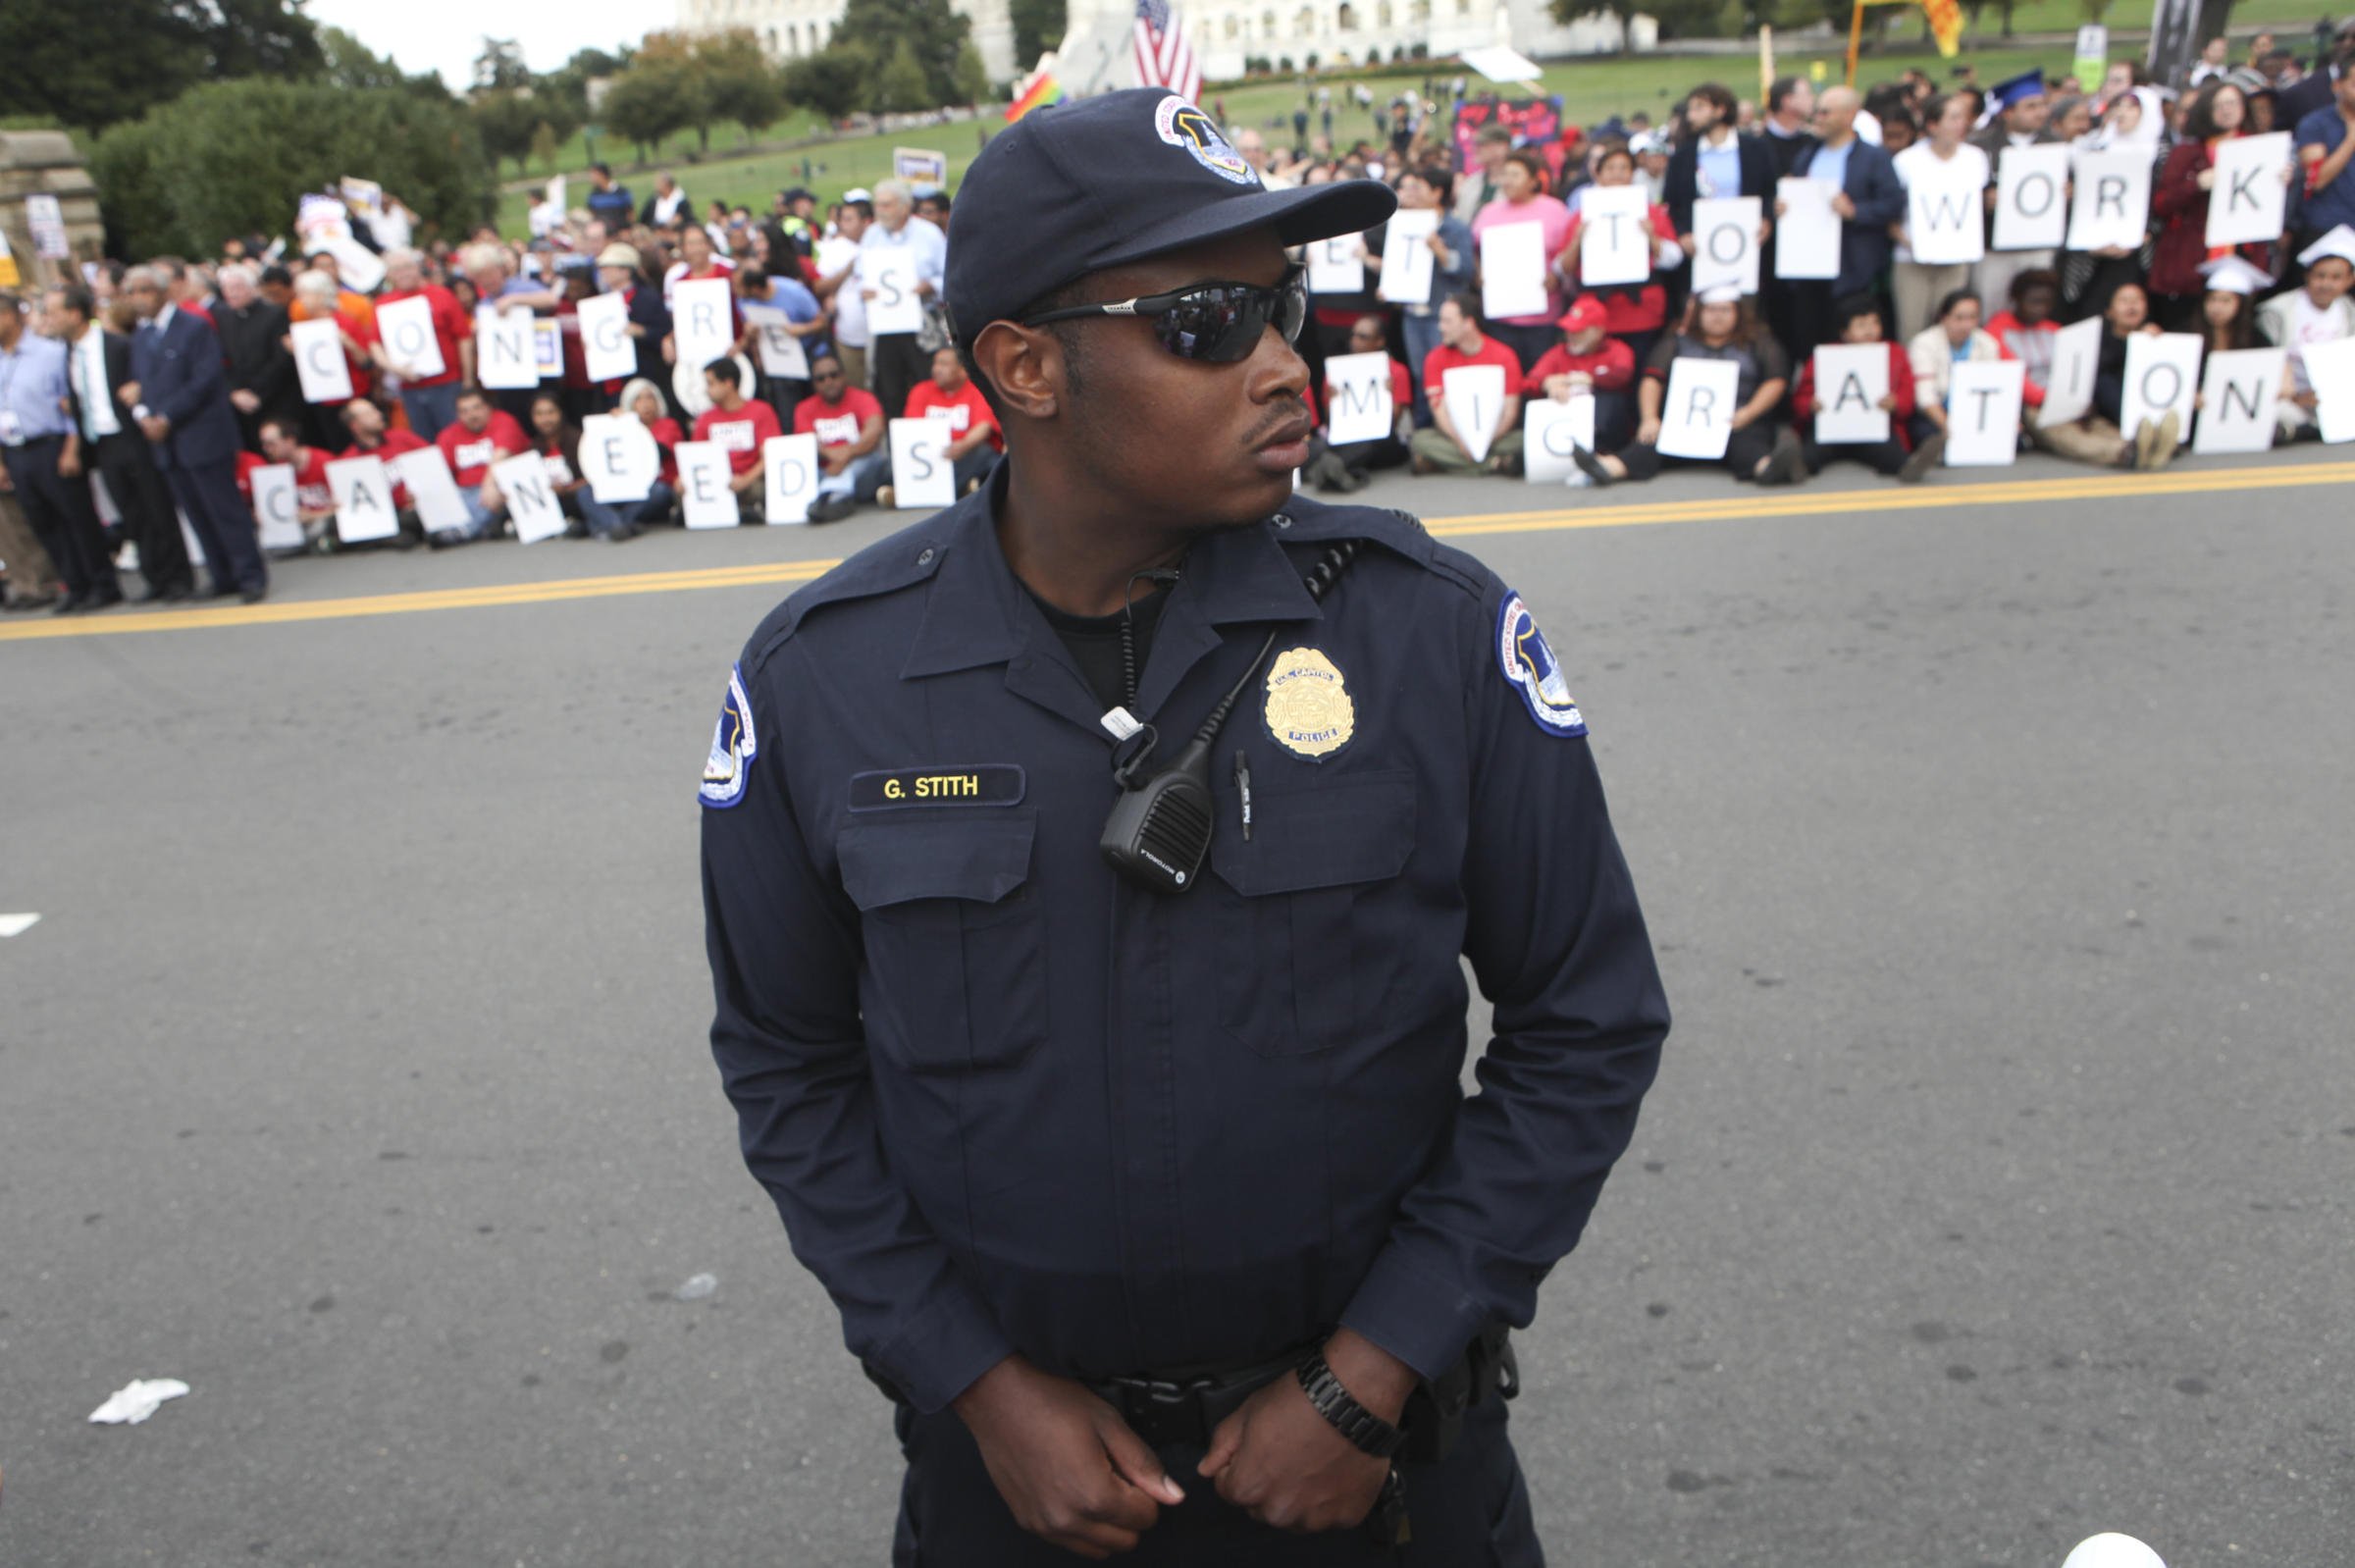 Immigration Reform Rally Ends In Arrests In Front Of U.S ...